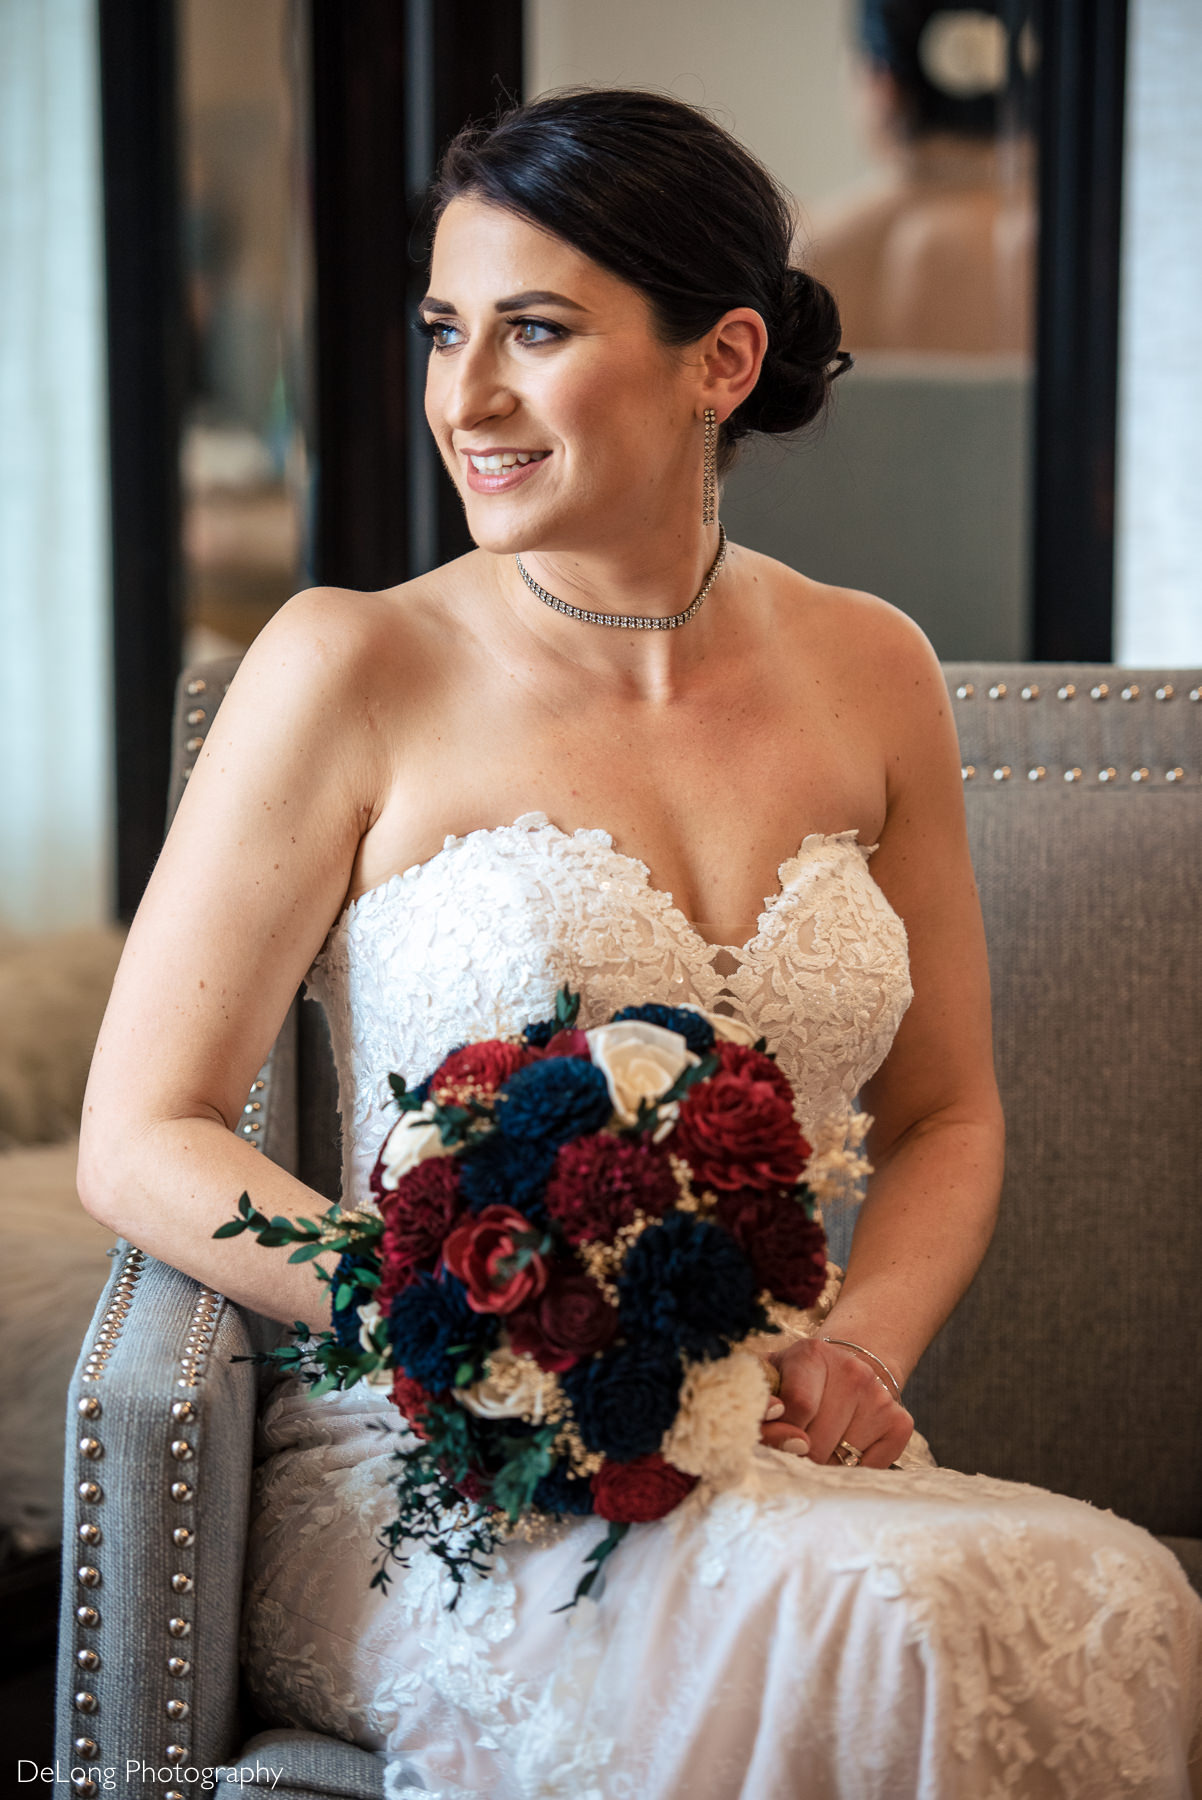 Bridal portrait in the bridal suite at Childress Vineyards by Charlotte Wedding Photographers DeLong Photography